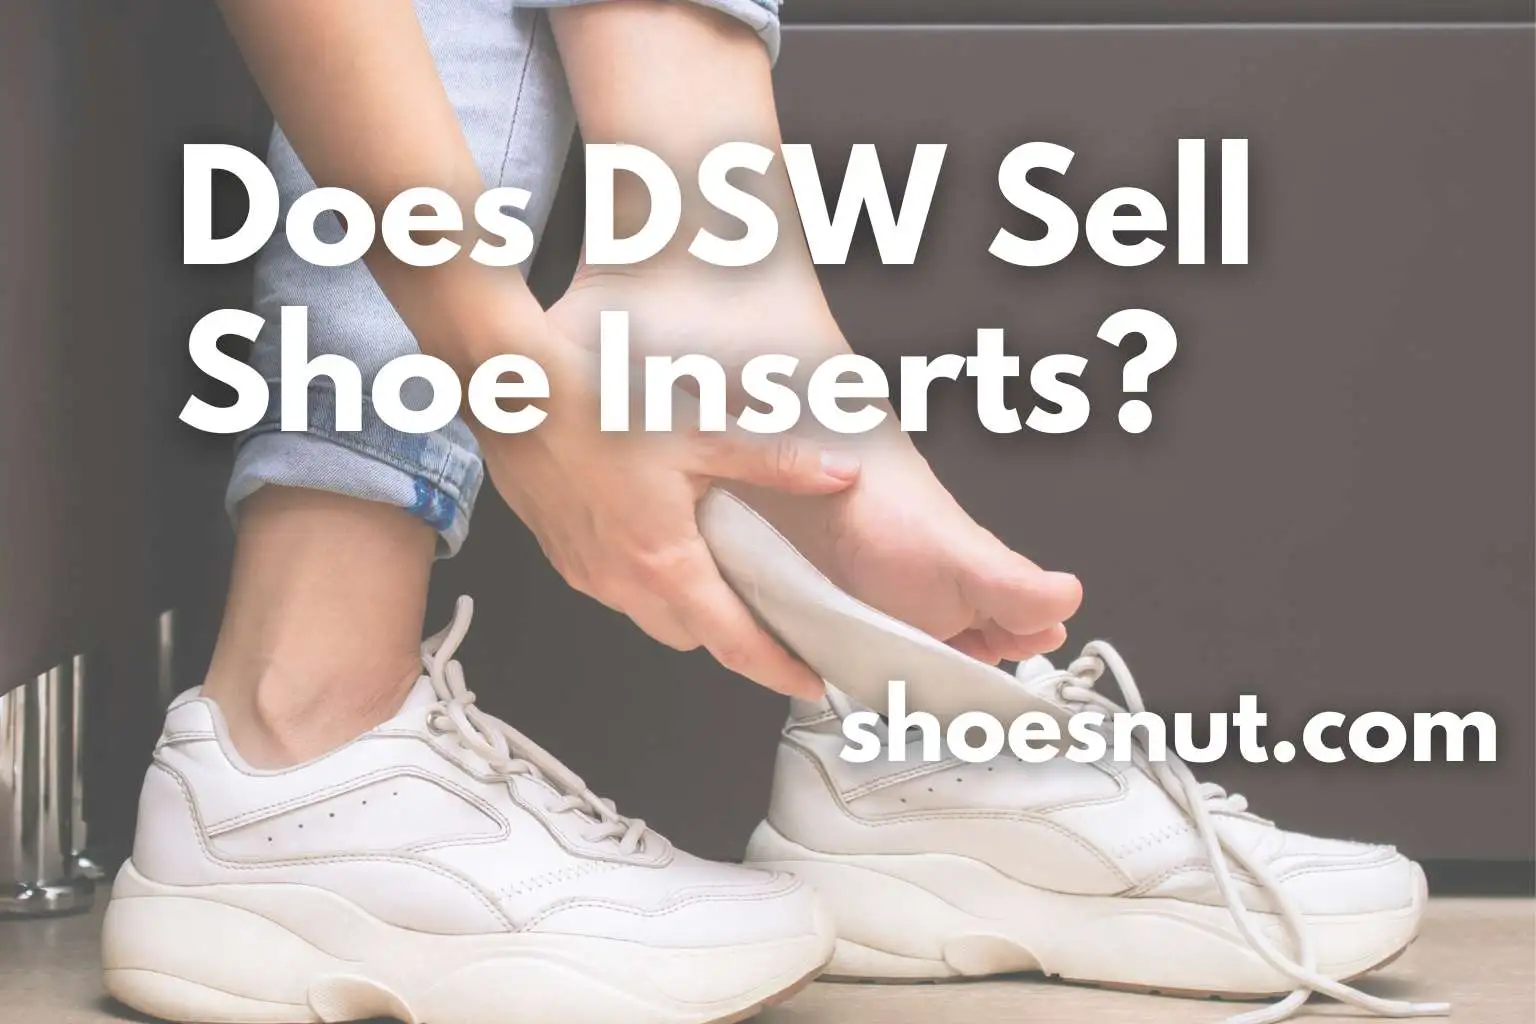 Does DSW Sell Shoe Inserts?